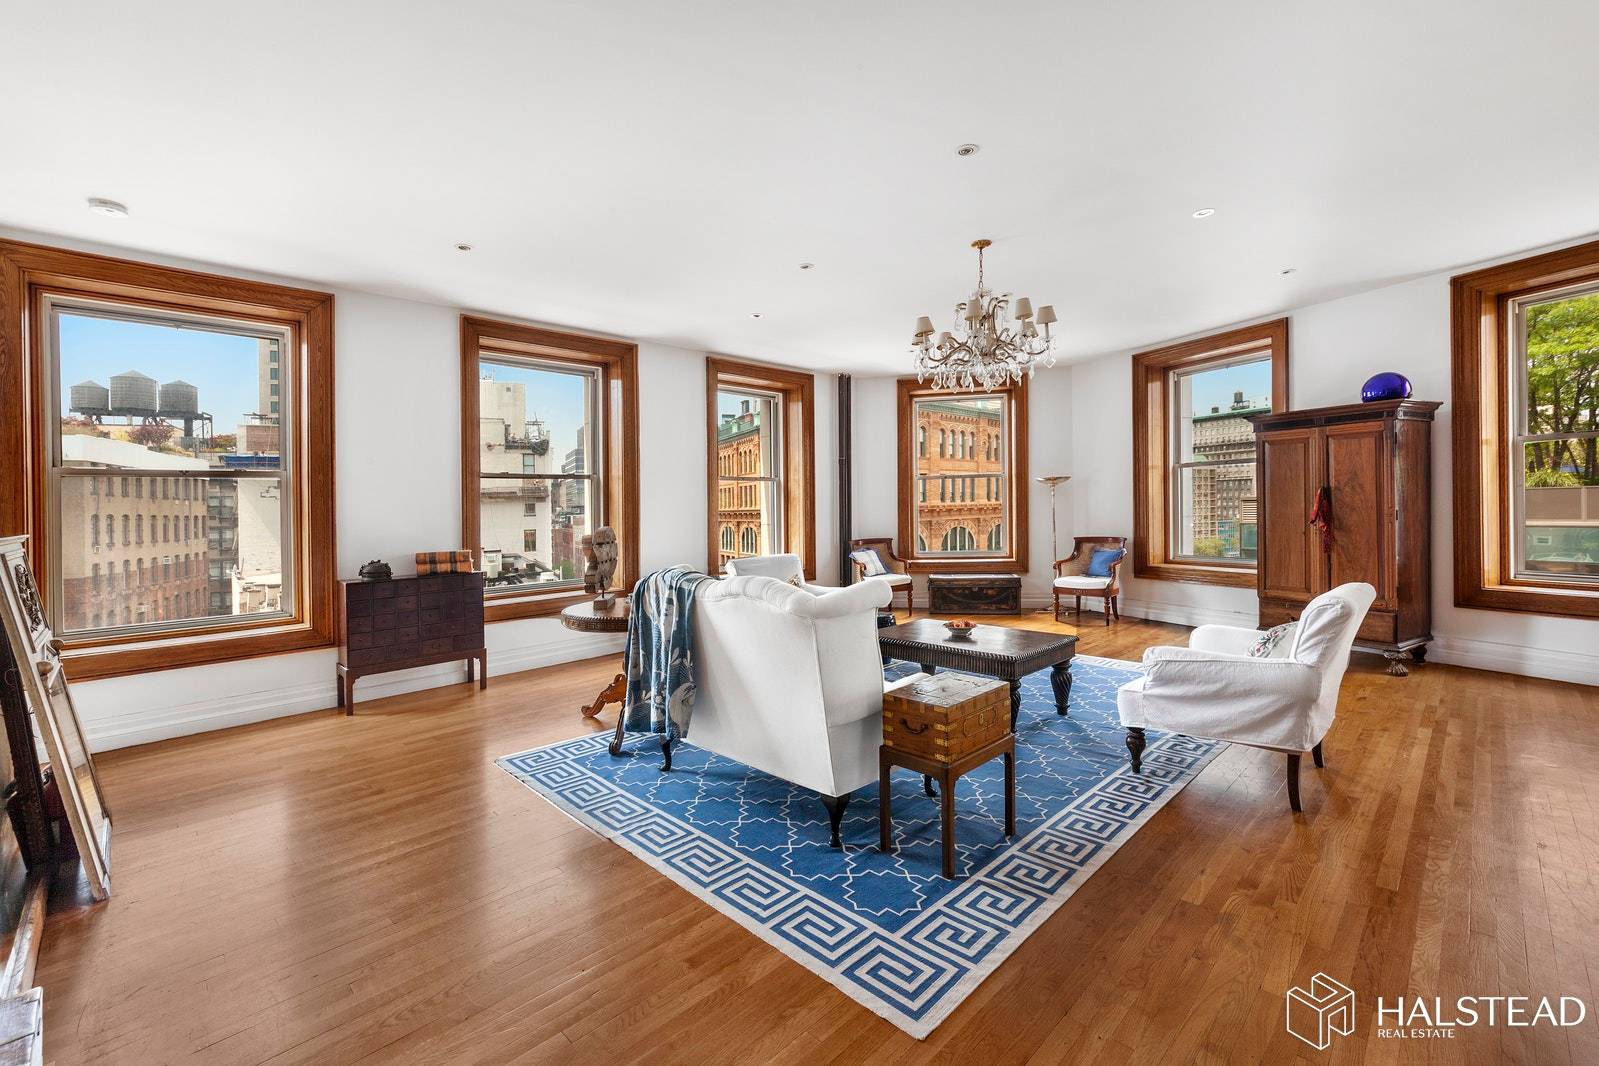 Enjoy brilliant light and open views from 14 oversized windows in this rare and authentic 3, 000 square foot corner loft located right at the crossroads of Greenwich Village and ...